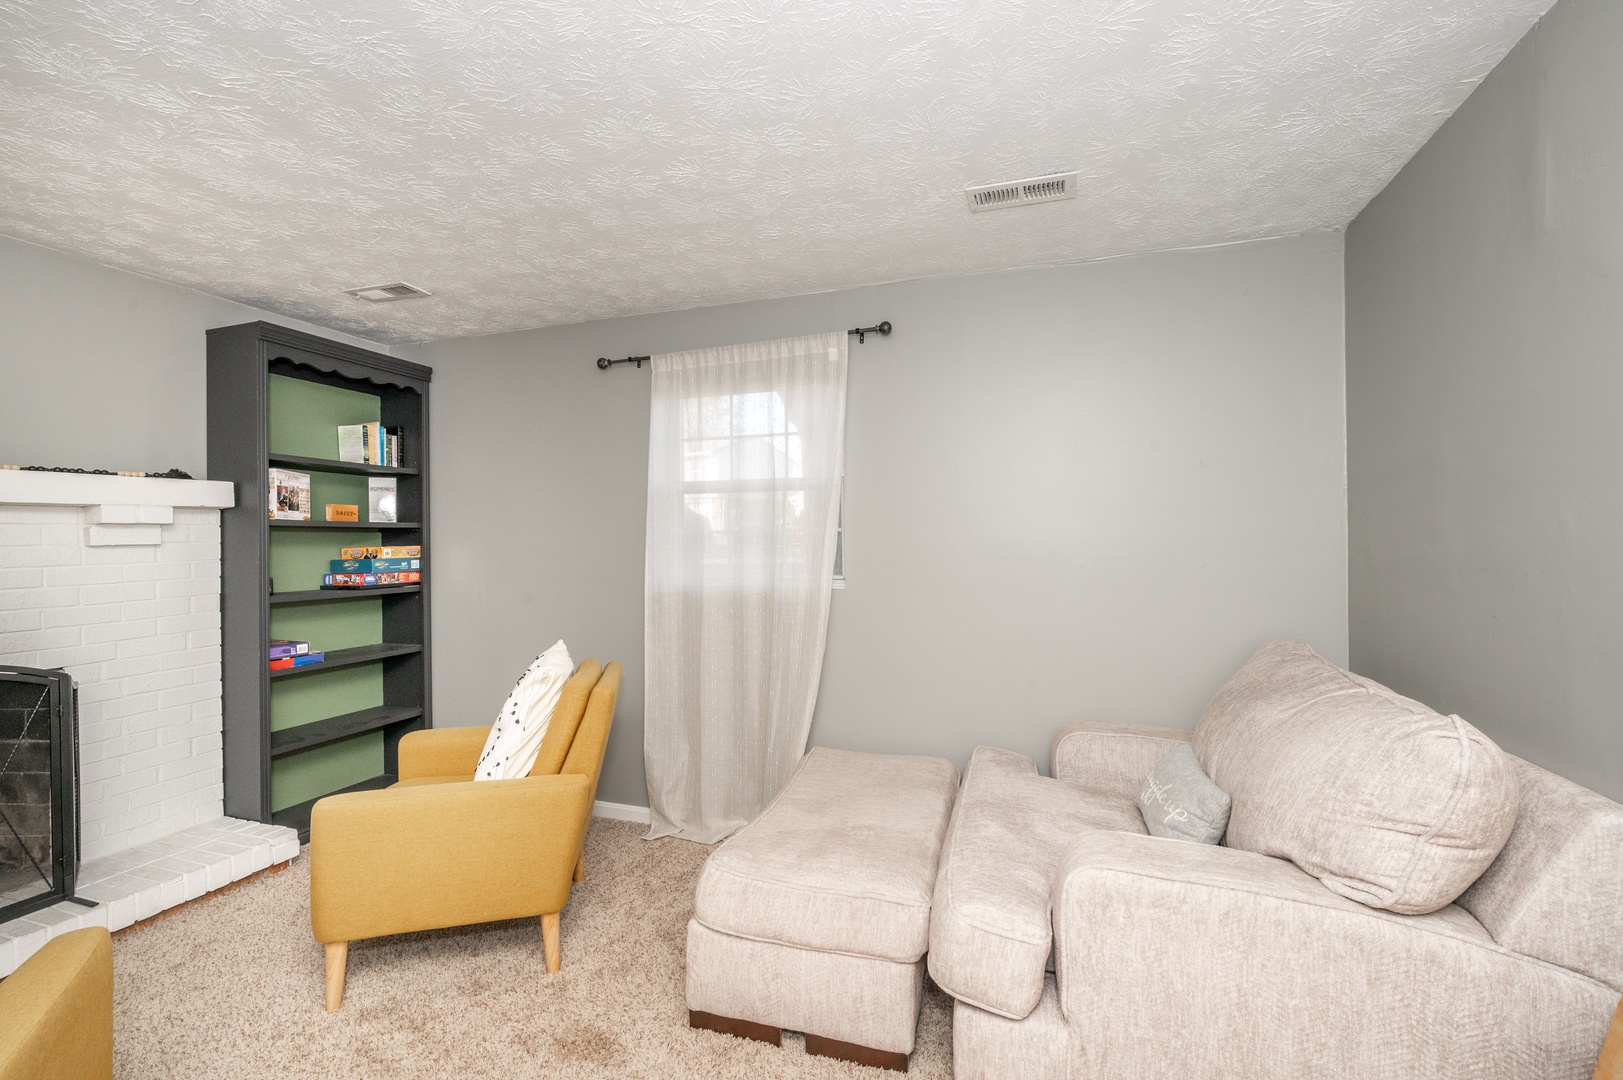 Escape to the lower-level den & kick back with a book